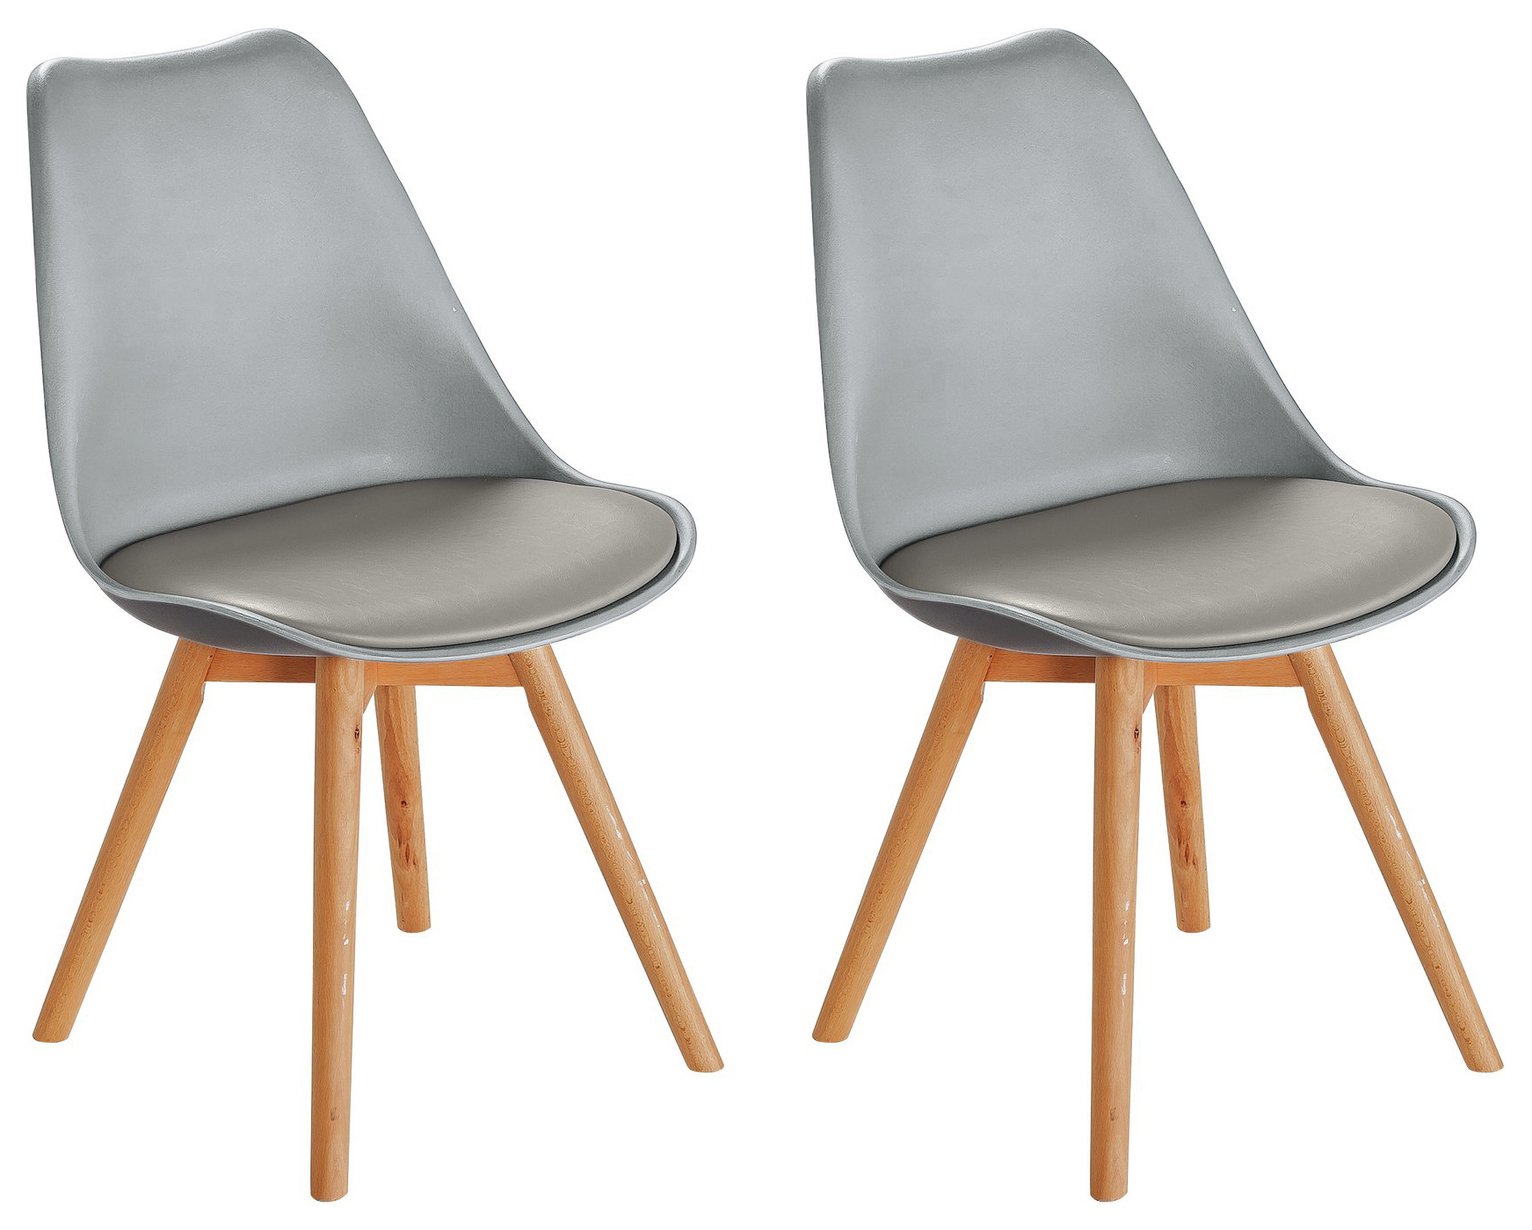 Argos Home Charlie Pair of Plastic Chairs - Grey